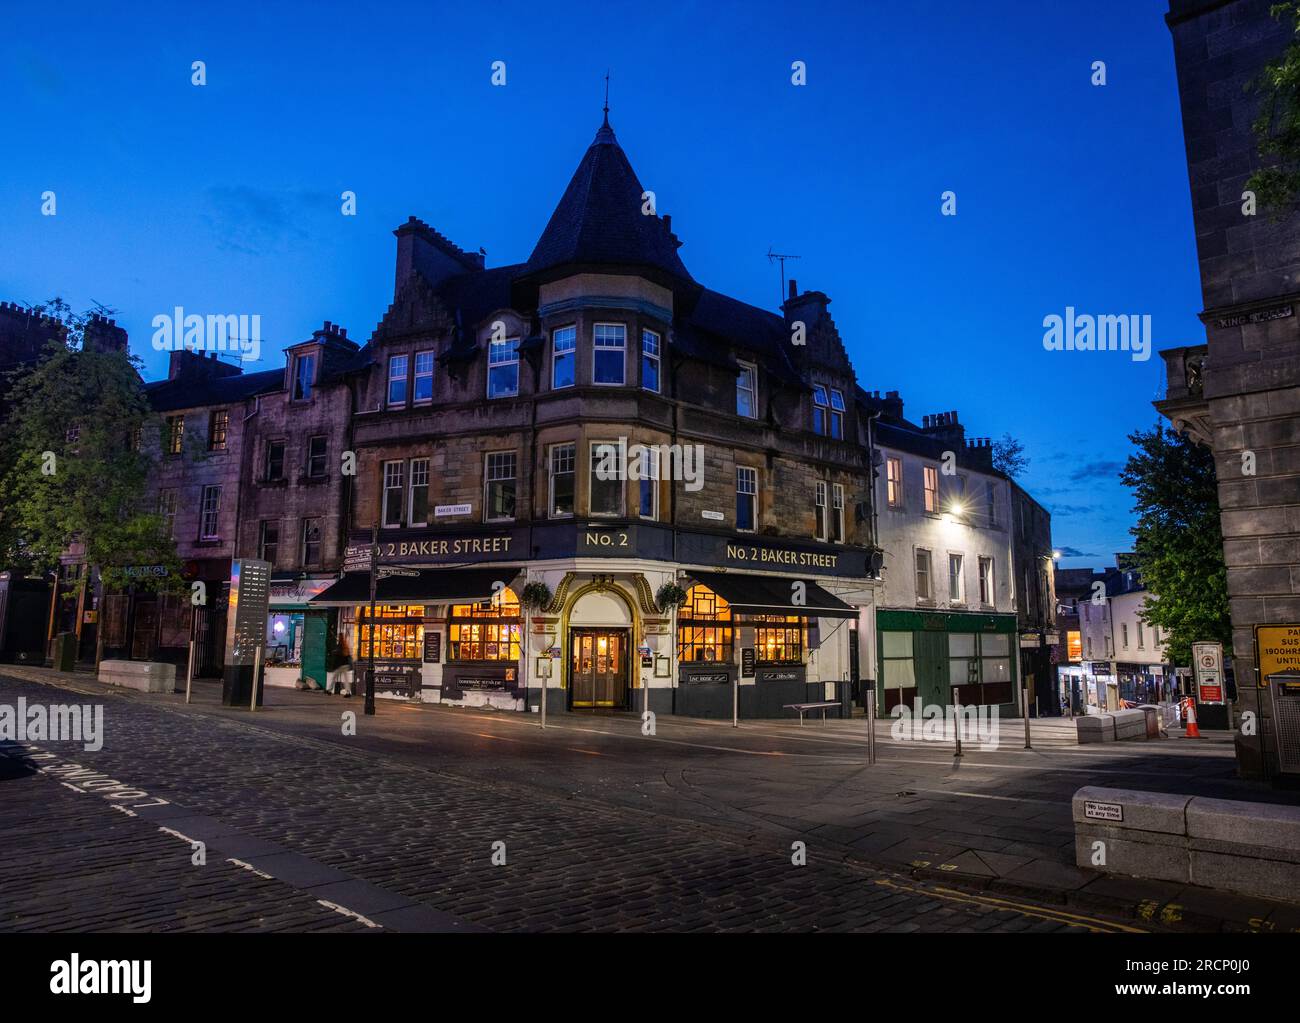 No 2 Baker Street a pub in Stirling on a summers evening in Scotland's central belt. Stock Photo